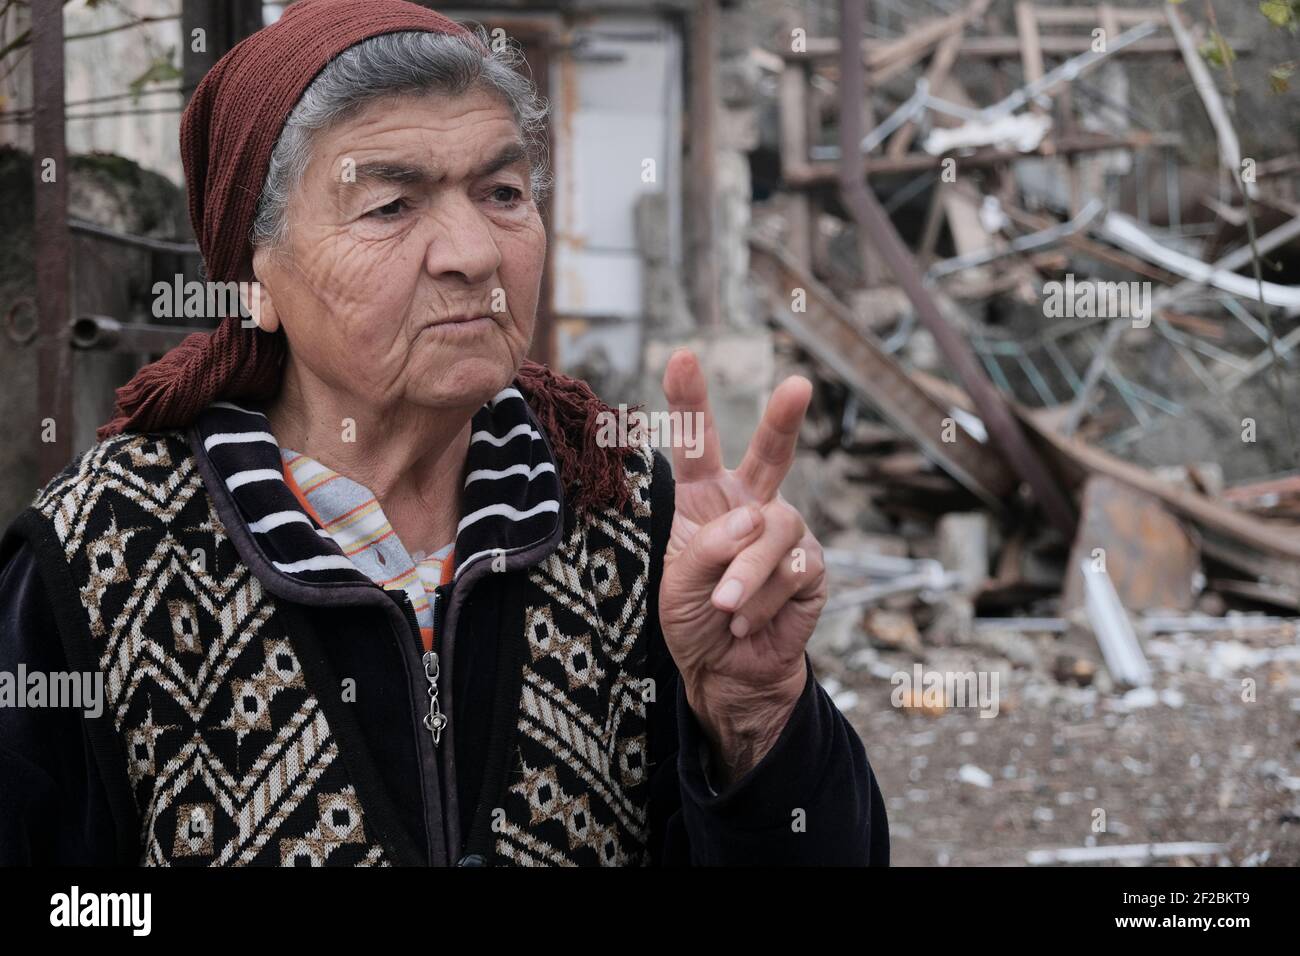 An elderly woman gives the V-sign in front of a house destroyed by Azerbaijan's artillery during a military conflict in Stepanakert the de facto capital of the self-proclaimed Republic of Artsakh or Nagorno-Karabakh, de jure part of the Republic of Azerbaijan on November 06, 2020. The fighting between Armenia and Azerbaijan over Nagorno-Karabakh known also as the Artsakh Republic re-erupted in late September into a six-week war with both countries accusing each other of provocation that left thousands dead. Stock Photo